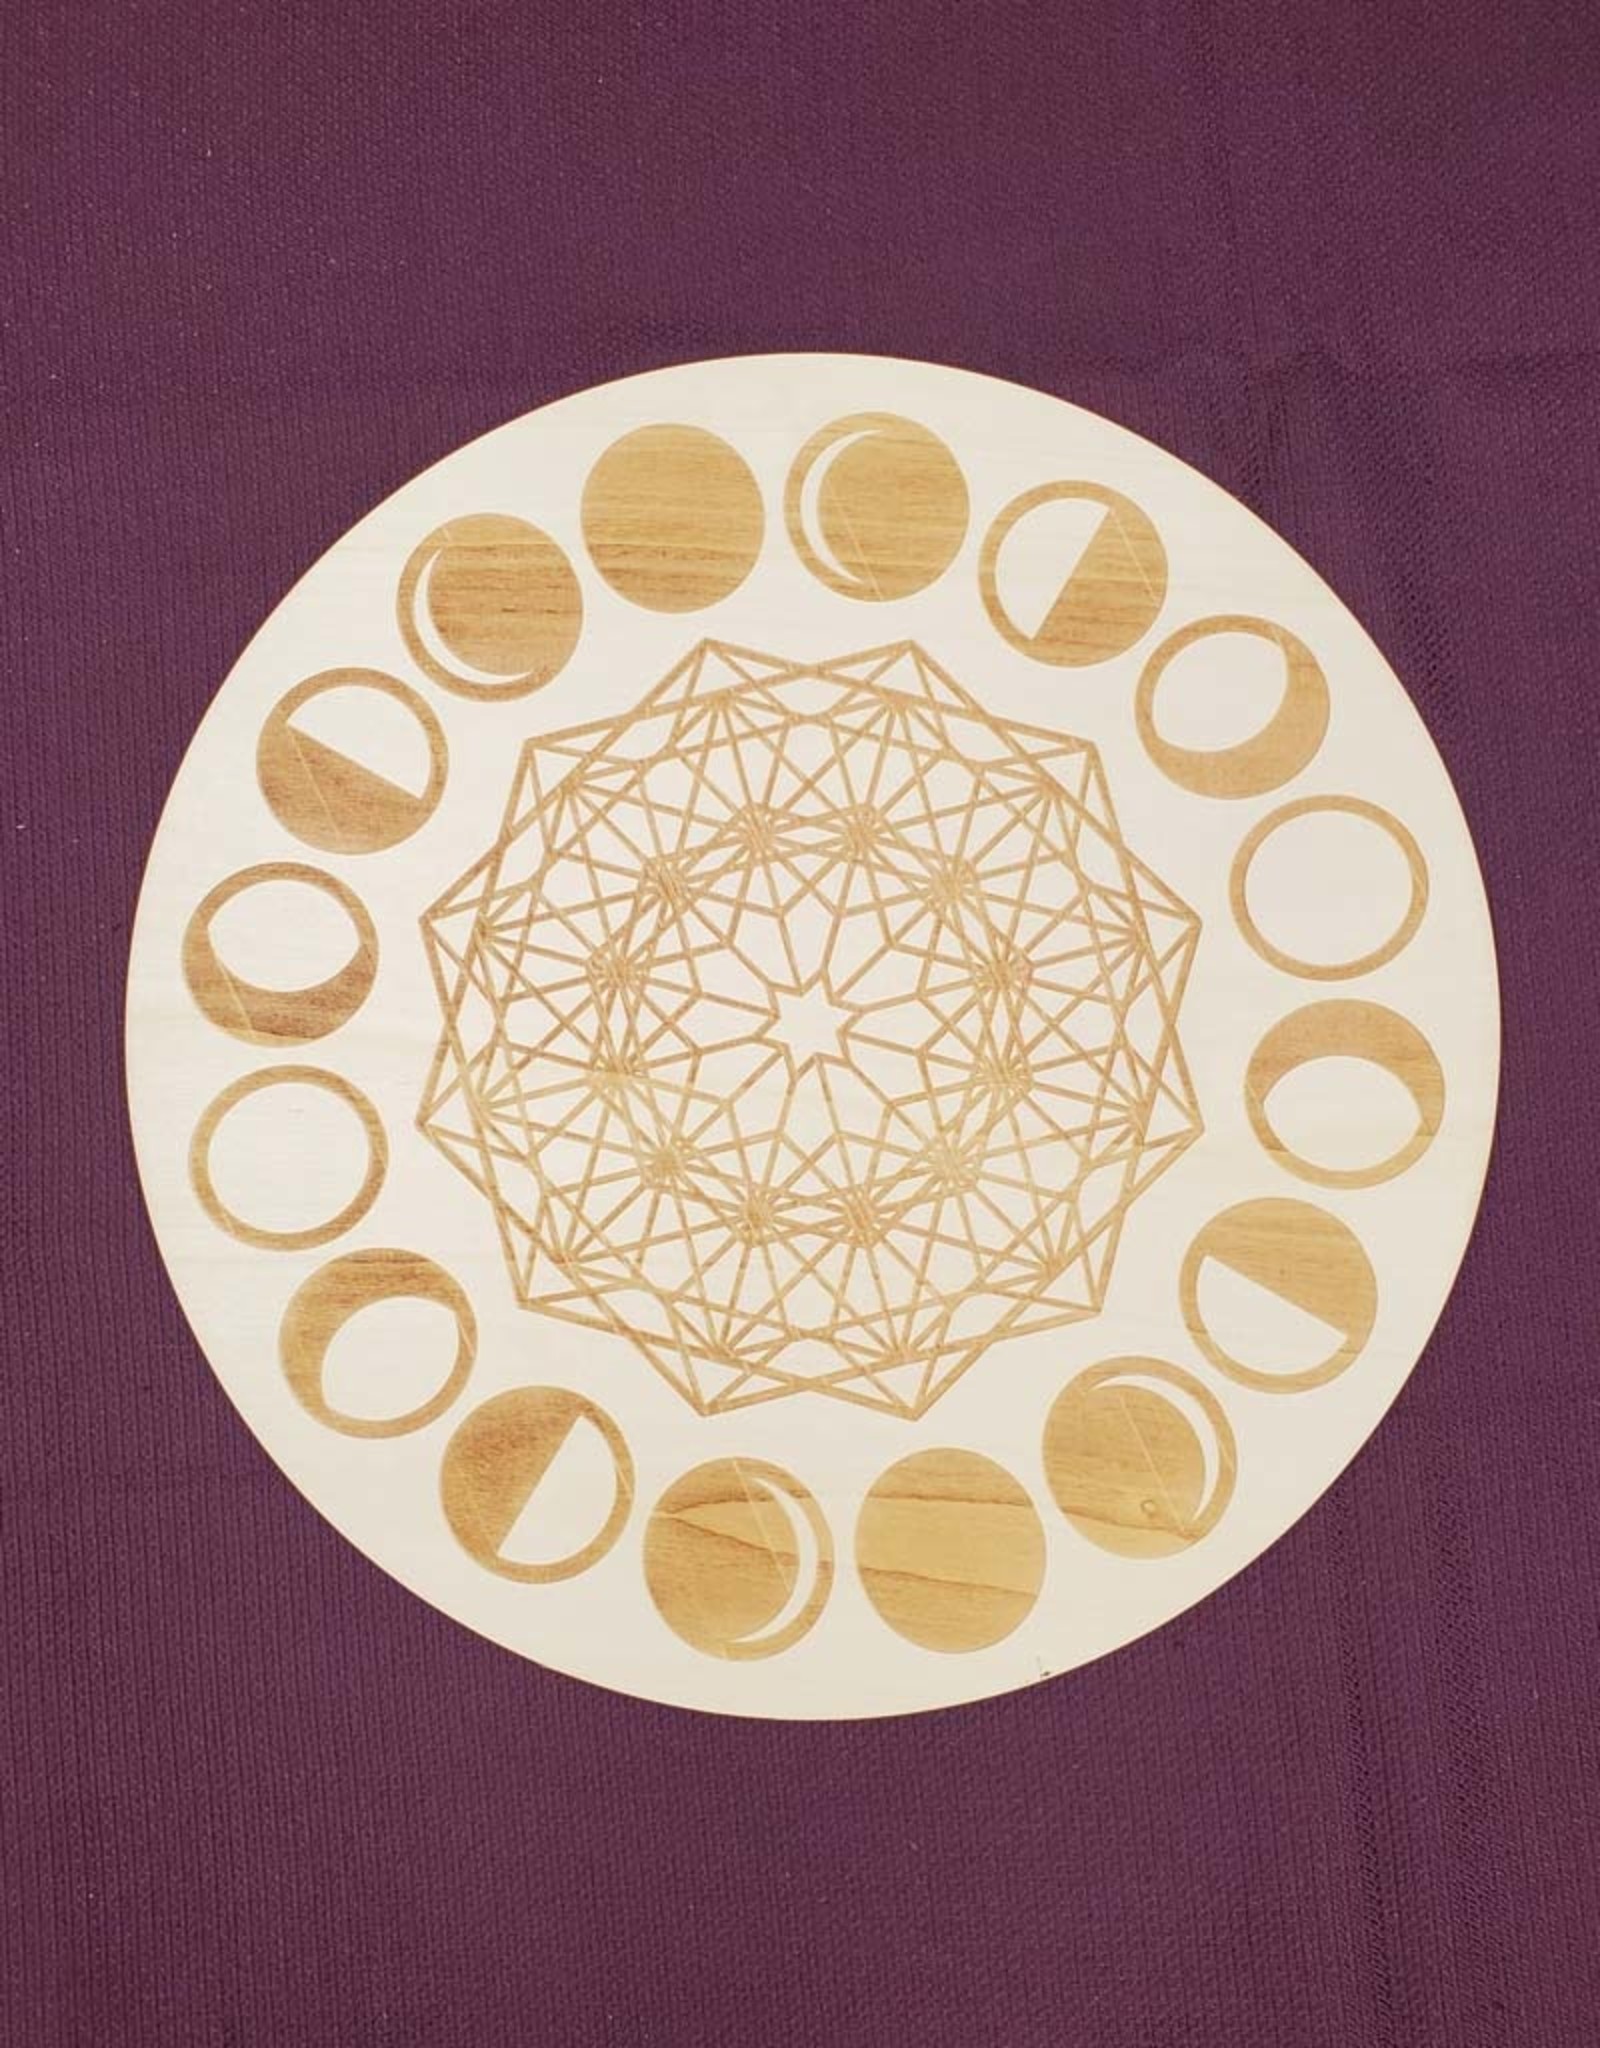 Wooden Painted Moon Phase Crystal Grid Plate